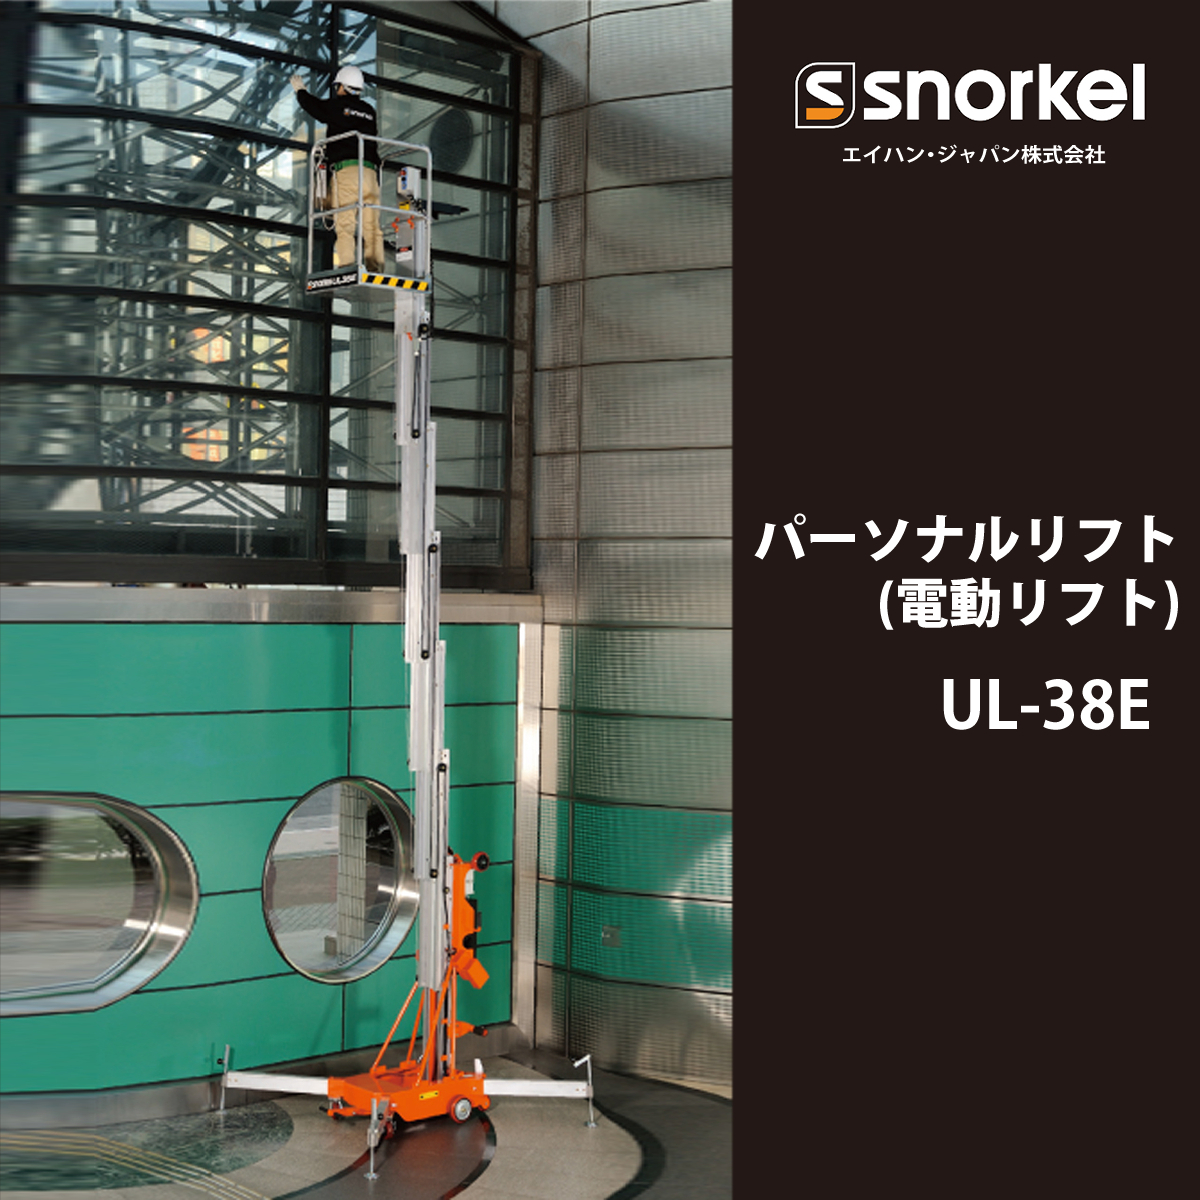  snorkel personal lift heights working bench electric lift UL-38E ( Hasegawa industry )